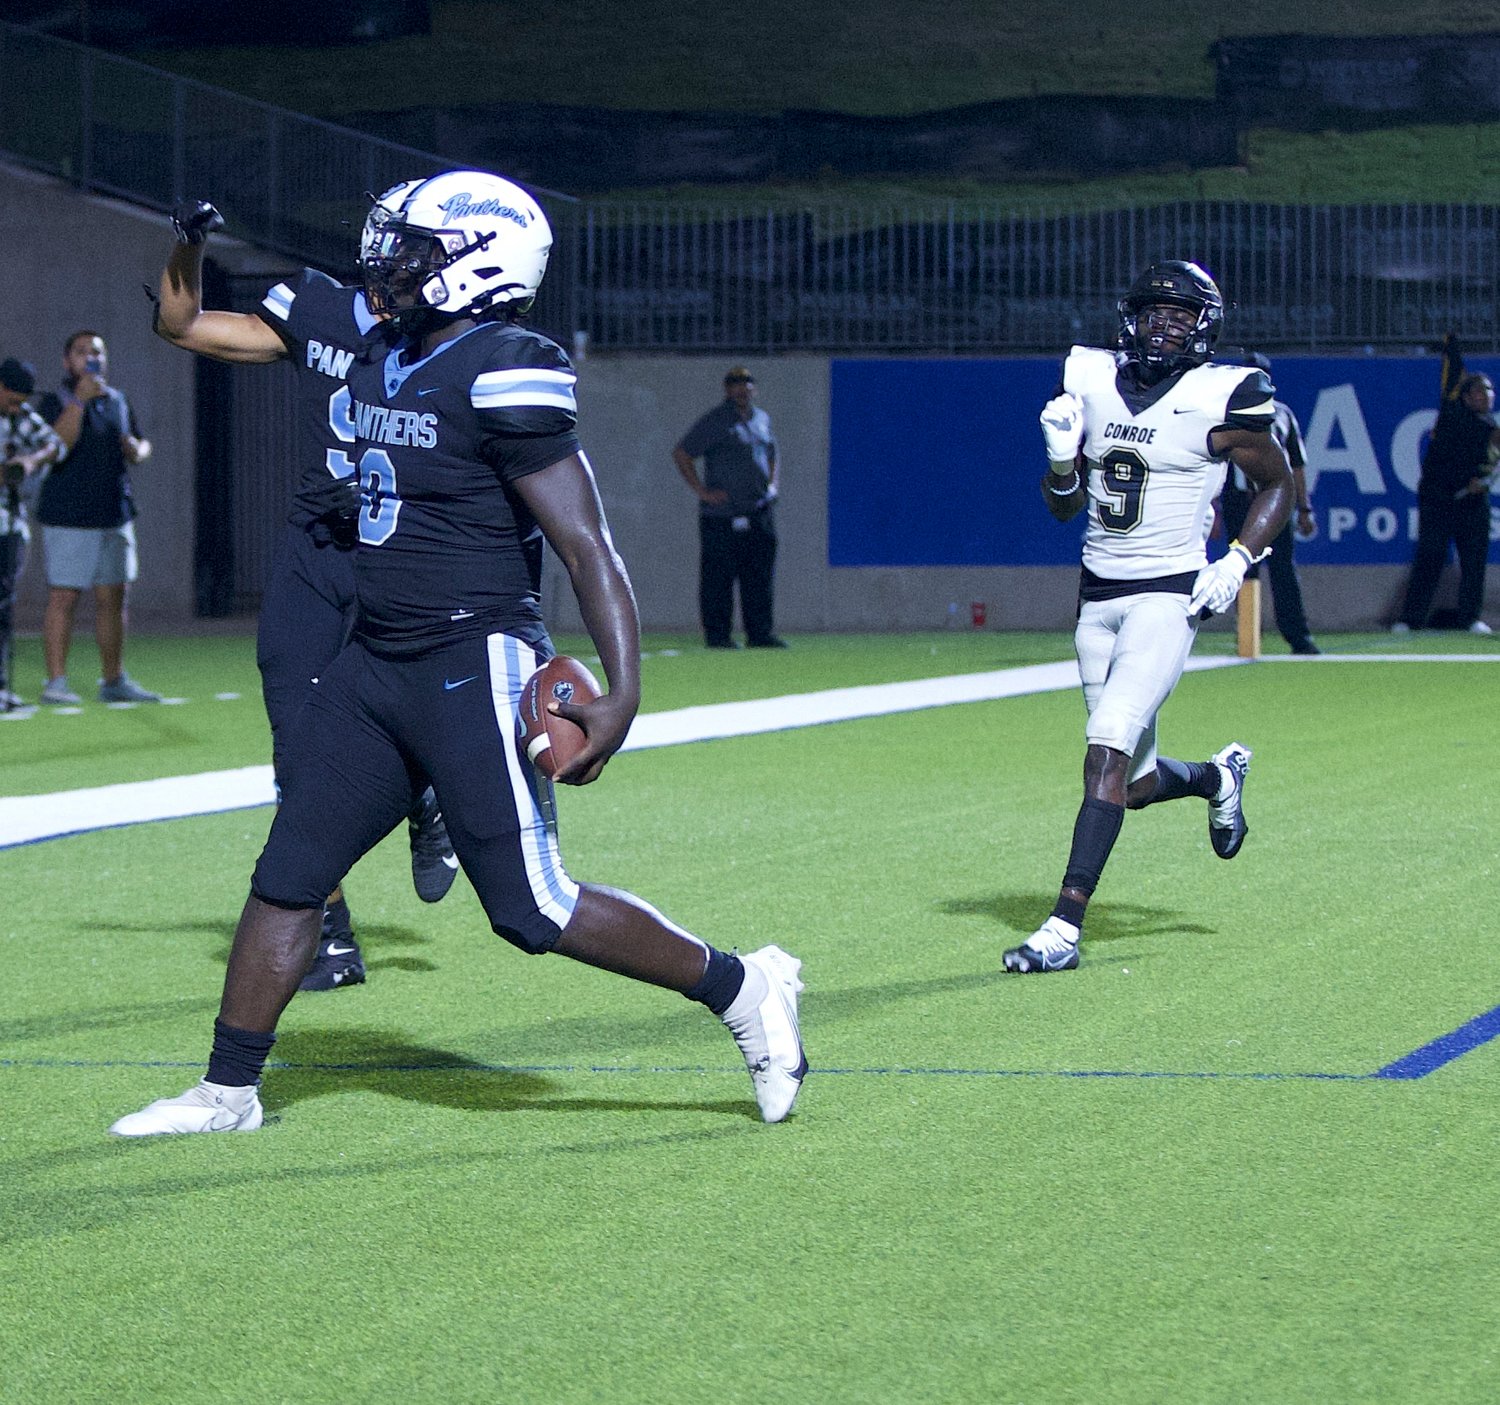 Paetow’s DJ Hicks celebrates after catching a touchdown pass against Conroe earlier this season.